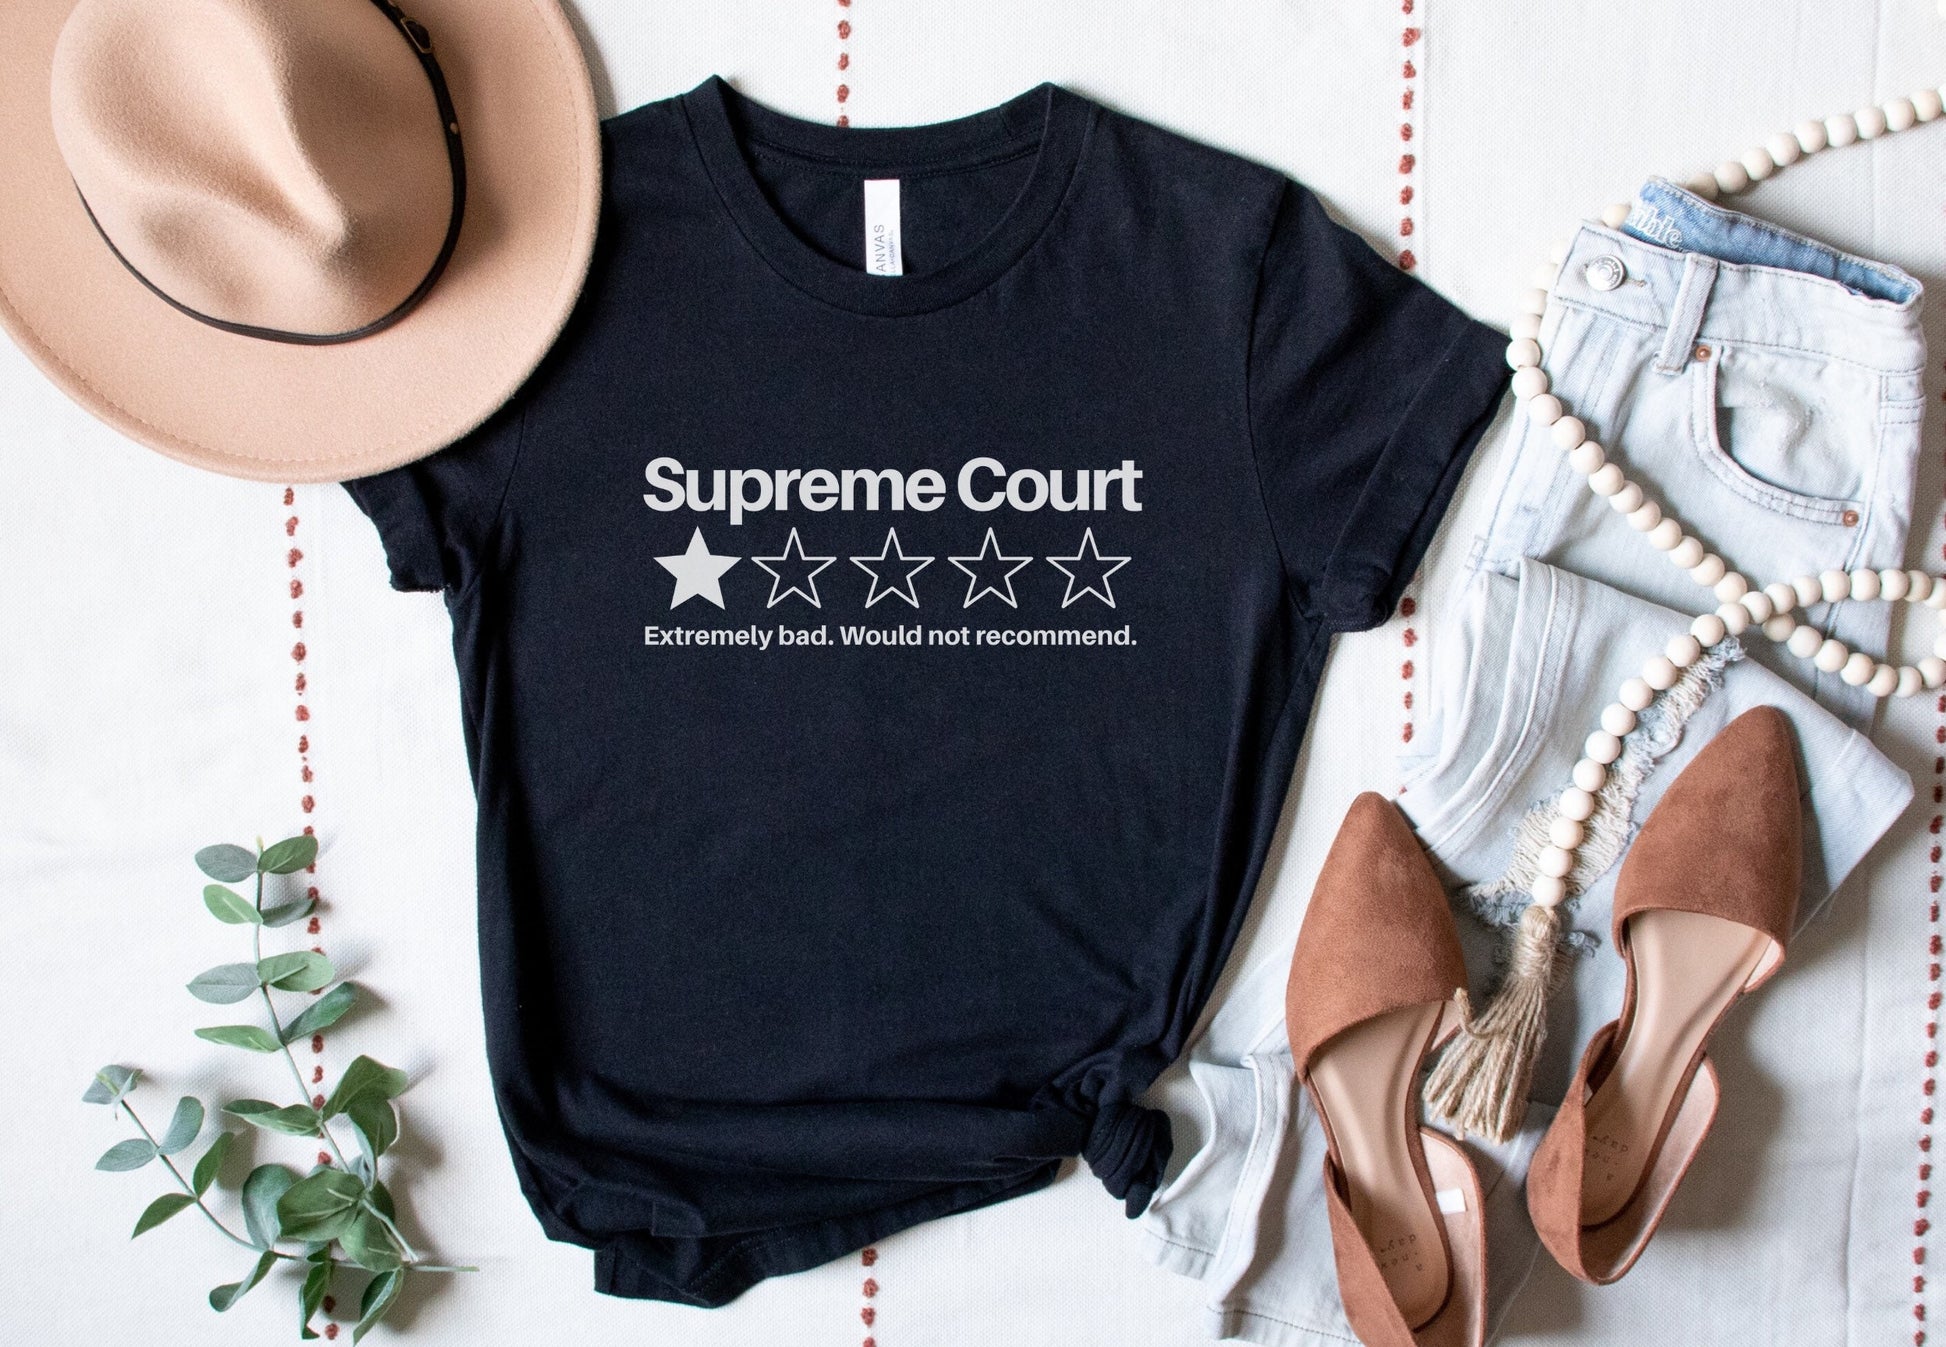 This Court Supremely Sucks Tee